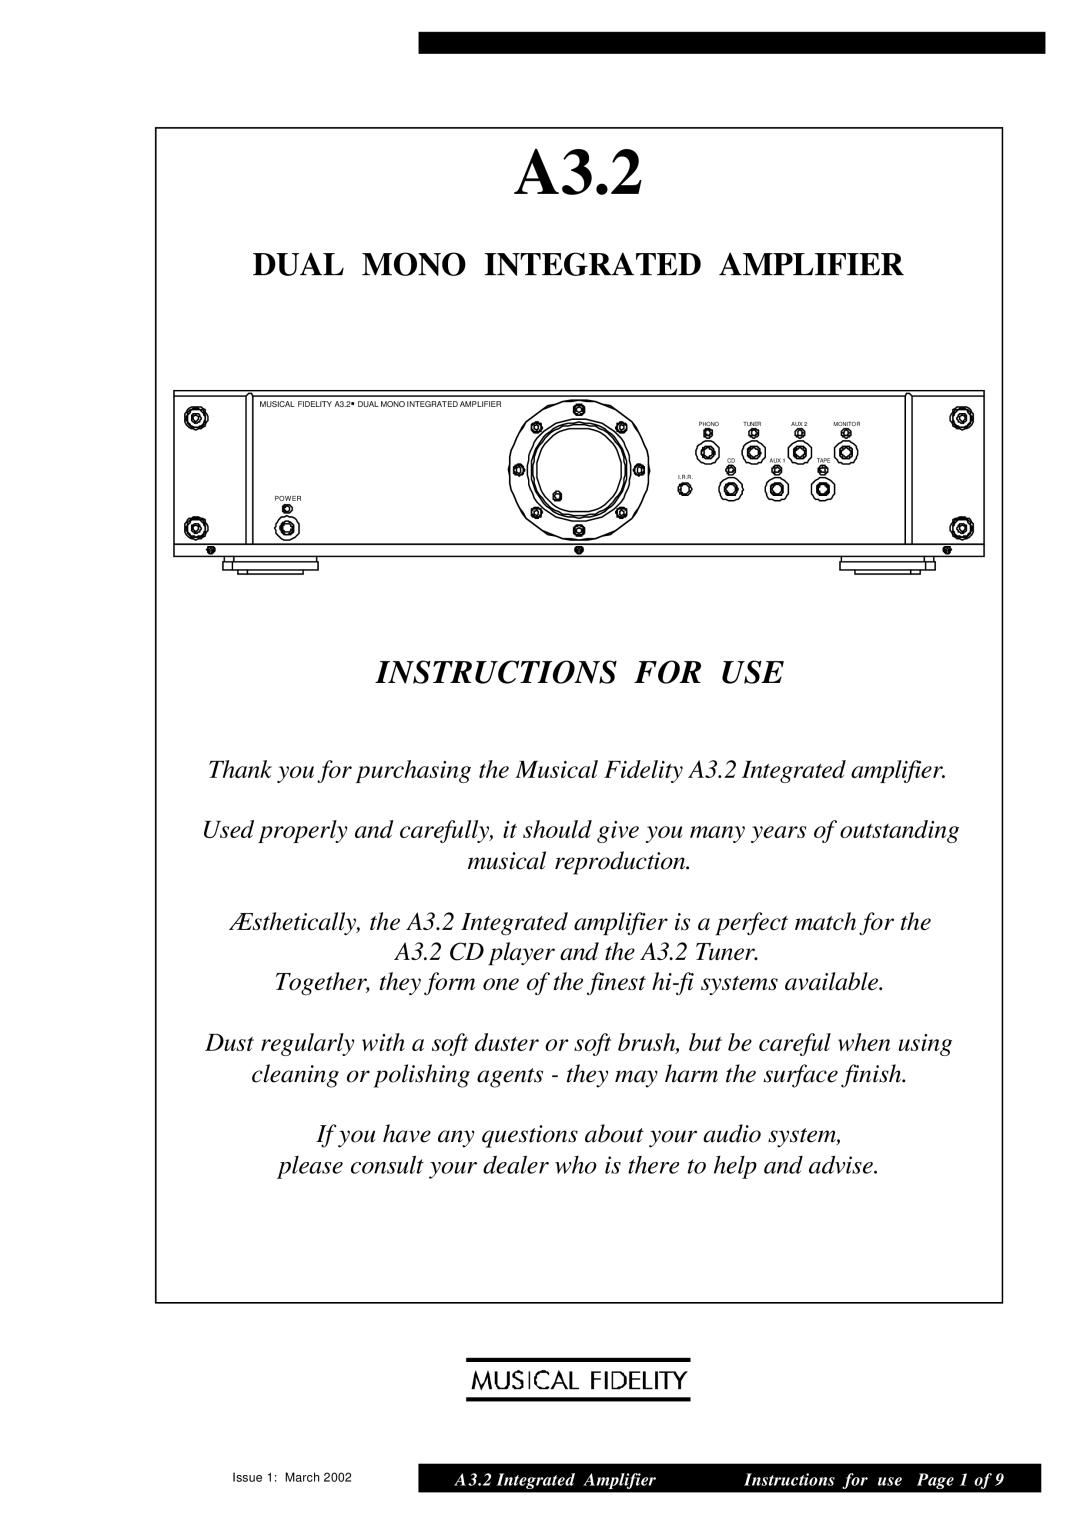 Musical Fidelity A3.2 manual Instructions For Use, Dual Mono Integrated Amplifier 